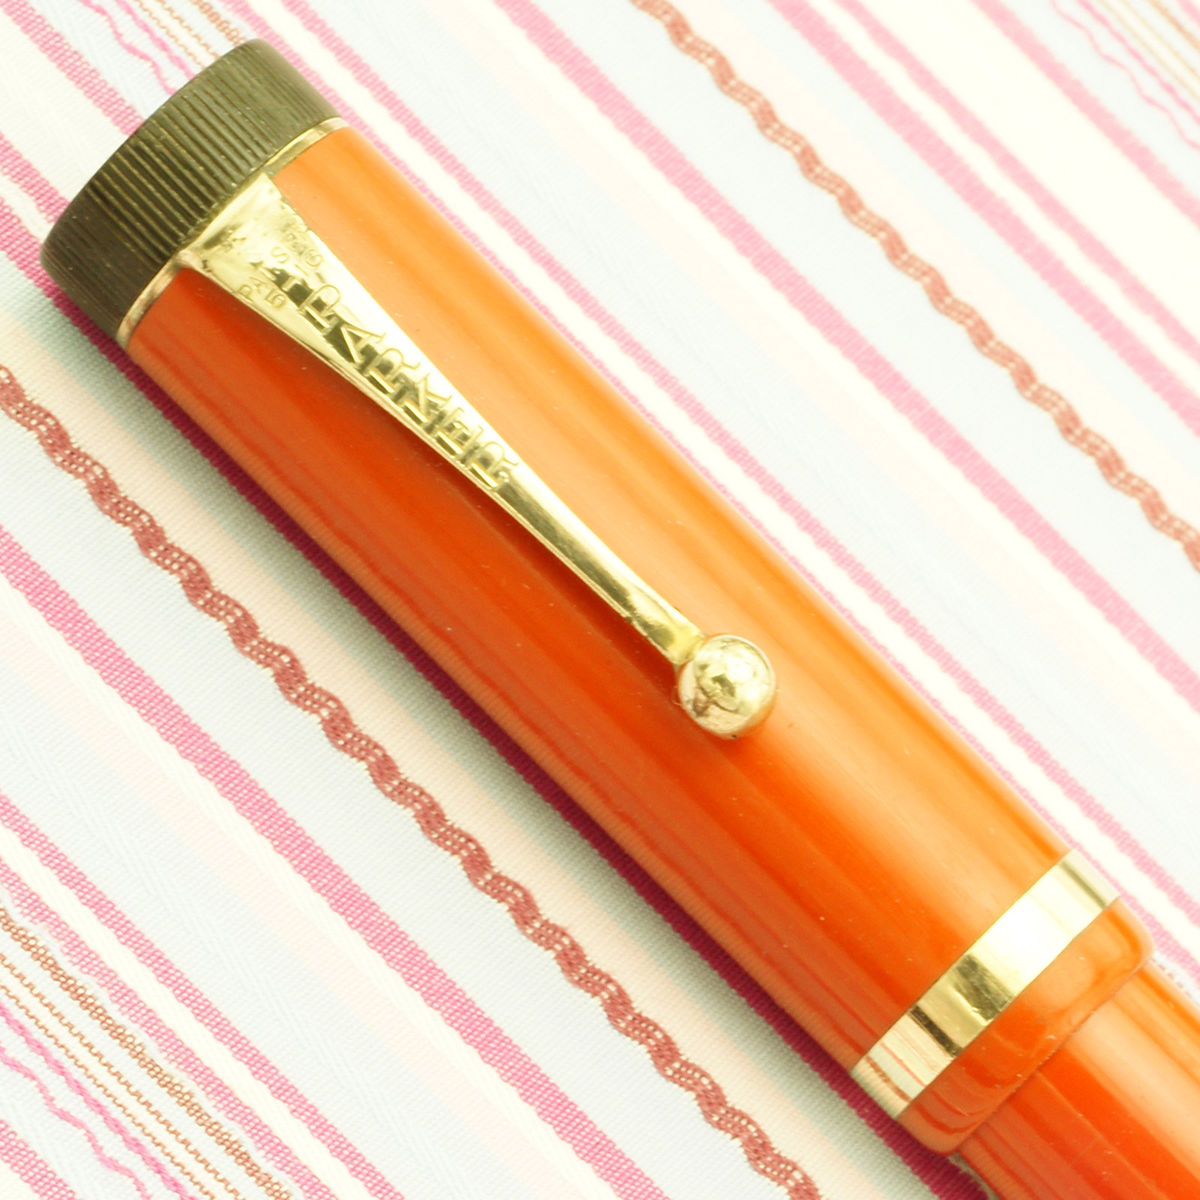 Vintage Parker Duofold Senior Big Red Lacquer Fountain Pen Oversize